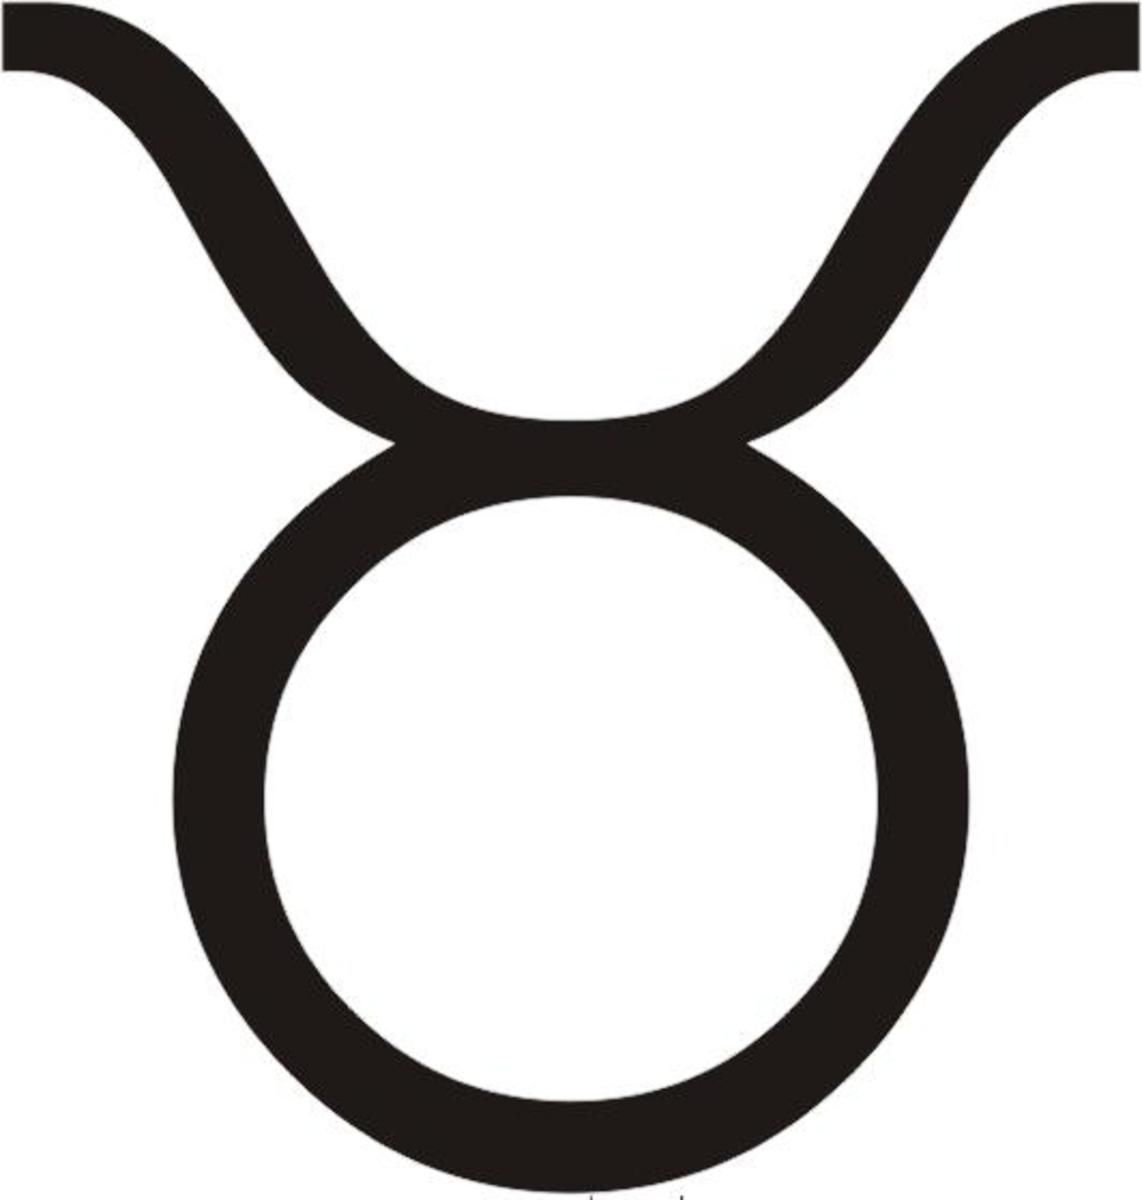 The glyph is used as a symbol in identifying a Zodiac sign, constellation, Astrological Planet, or the Moon's Nodes in a Natal Chart; also called the Birth Chart.